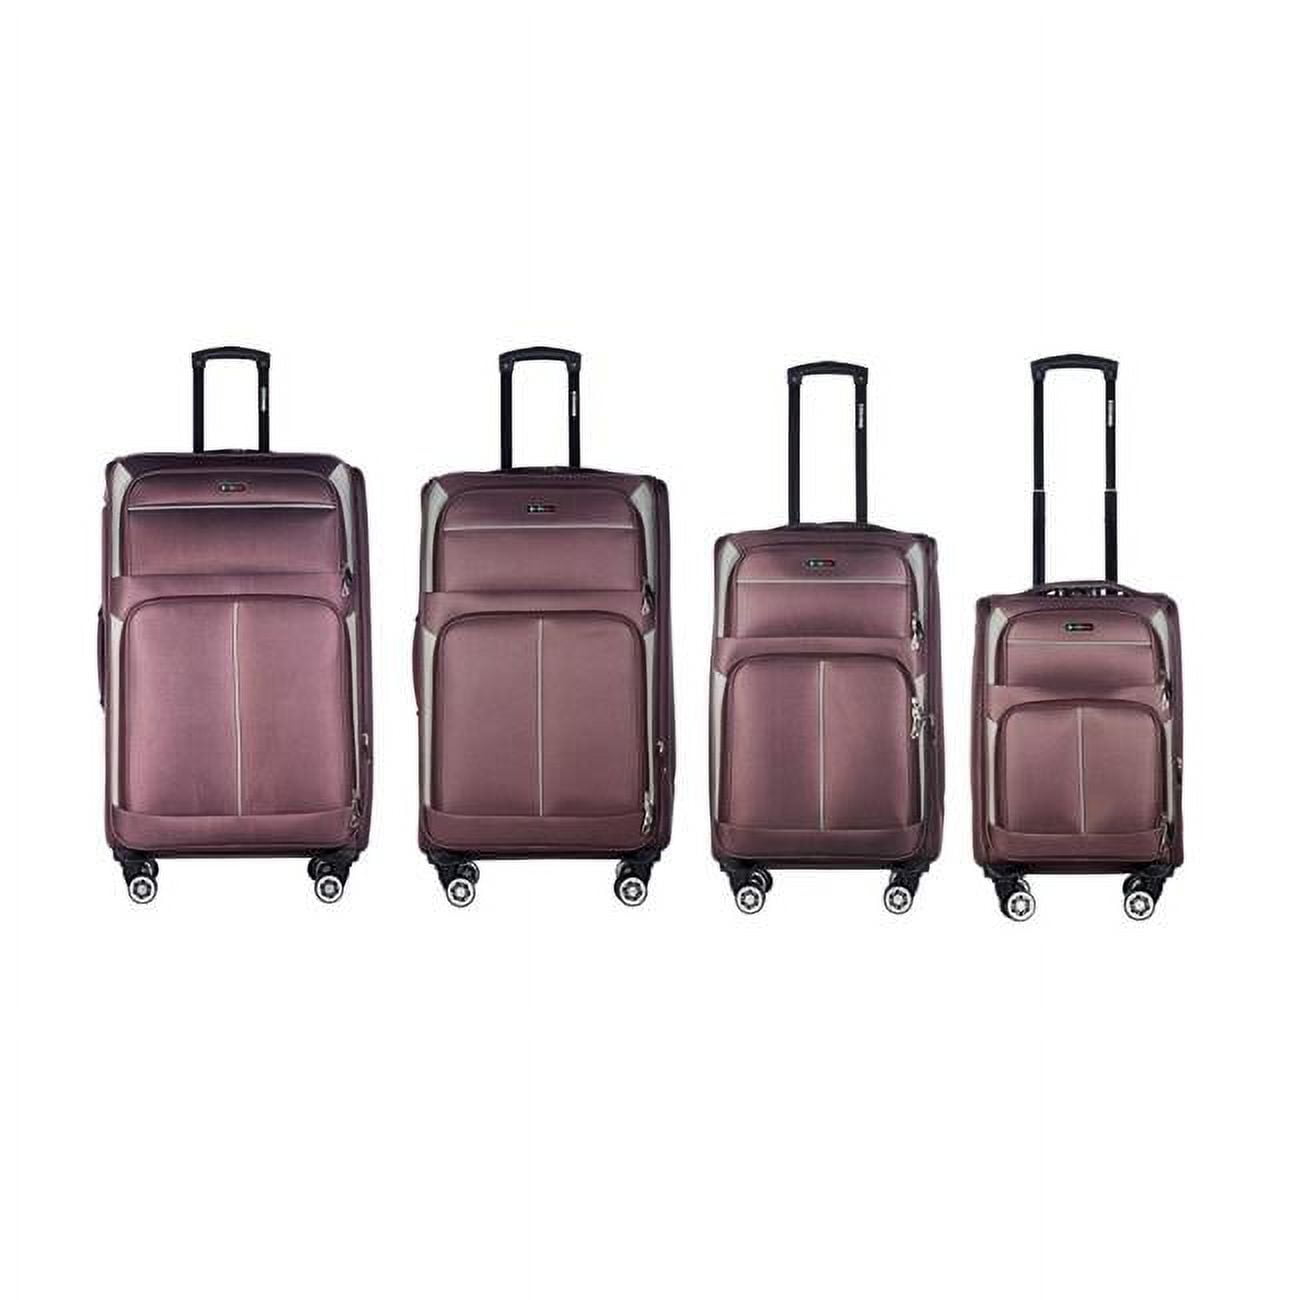 Picture of America&apos;s Travel Merchandise STAR-BROW-0608 Star collection brown luggage Set(20/26/28/30&apos;)